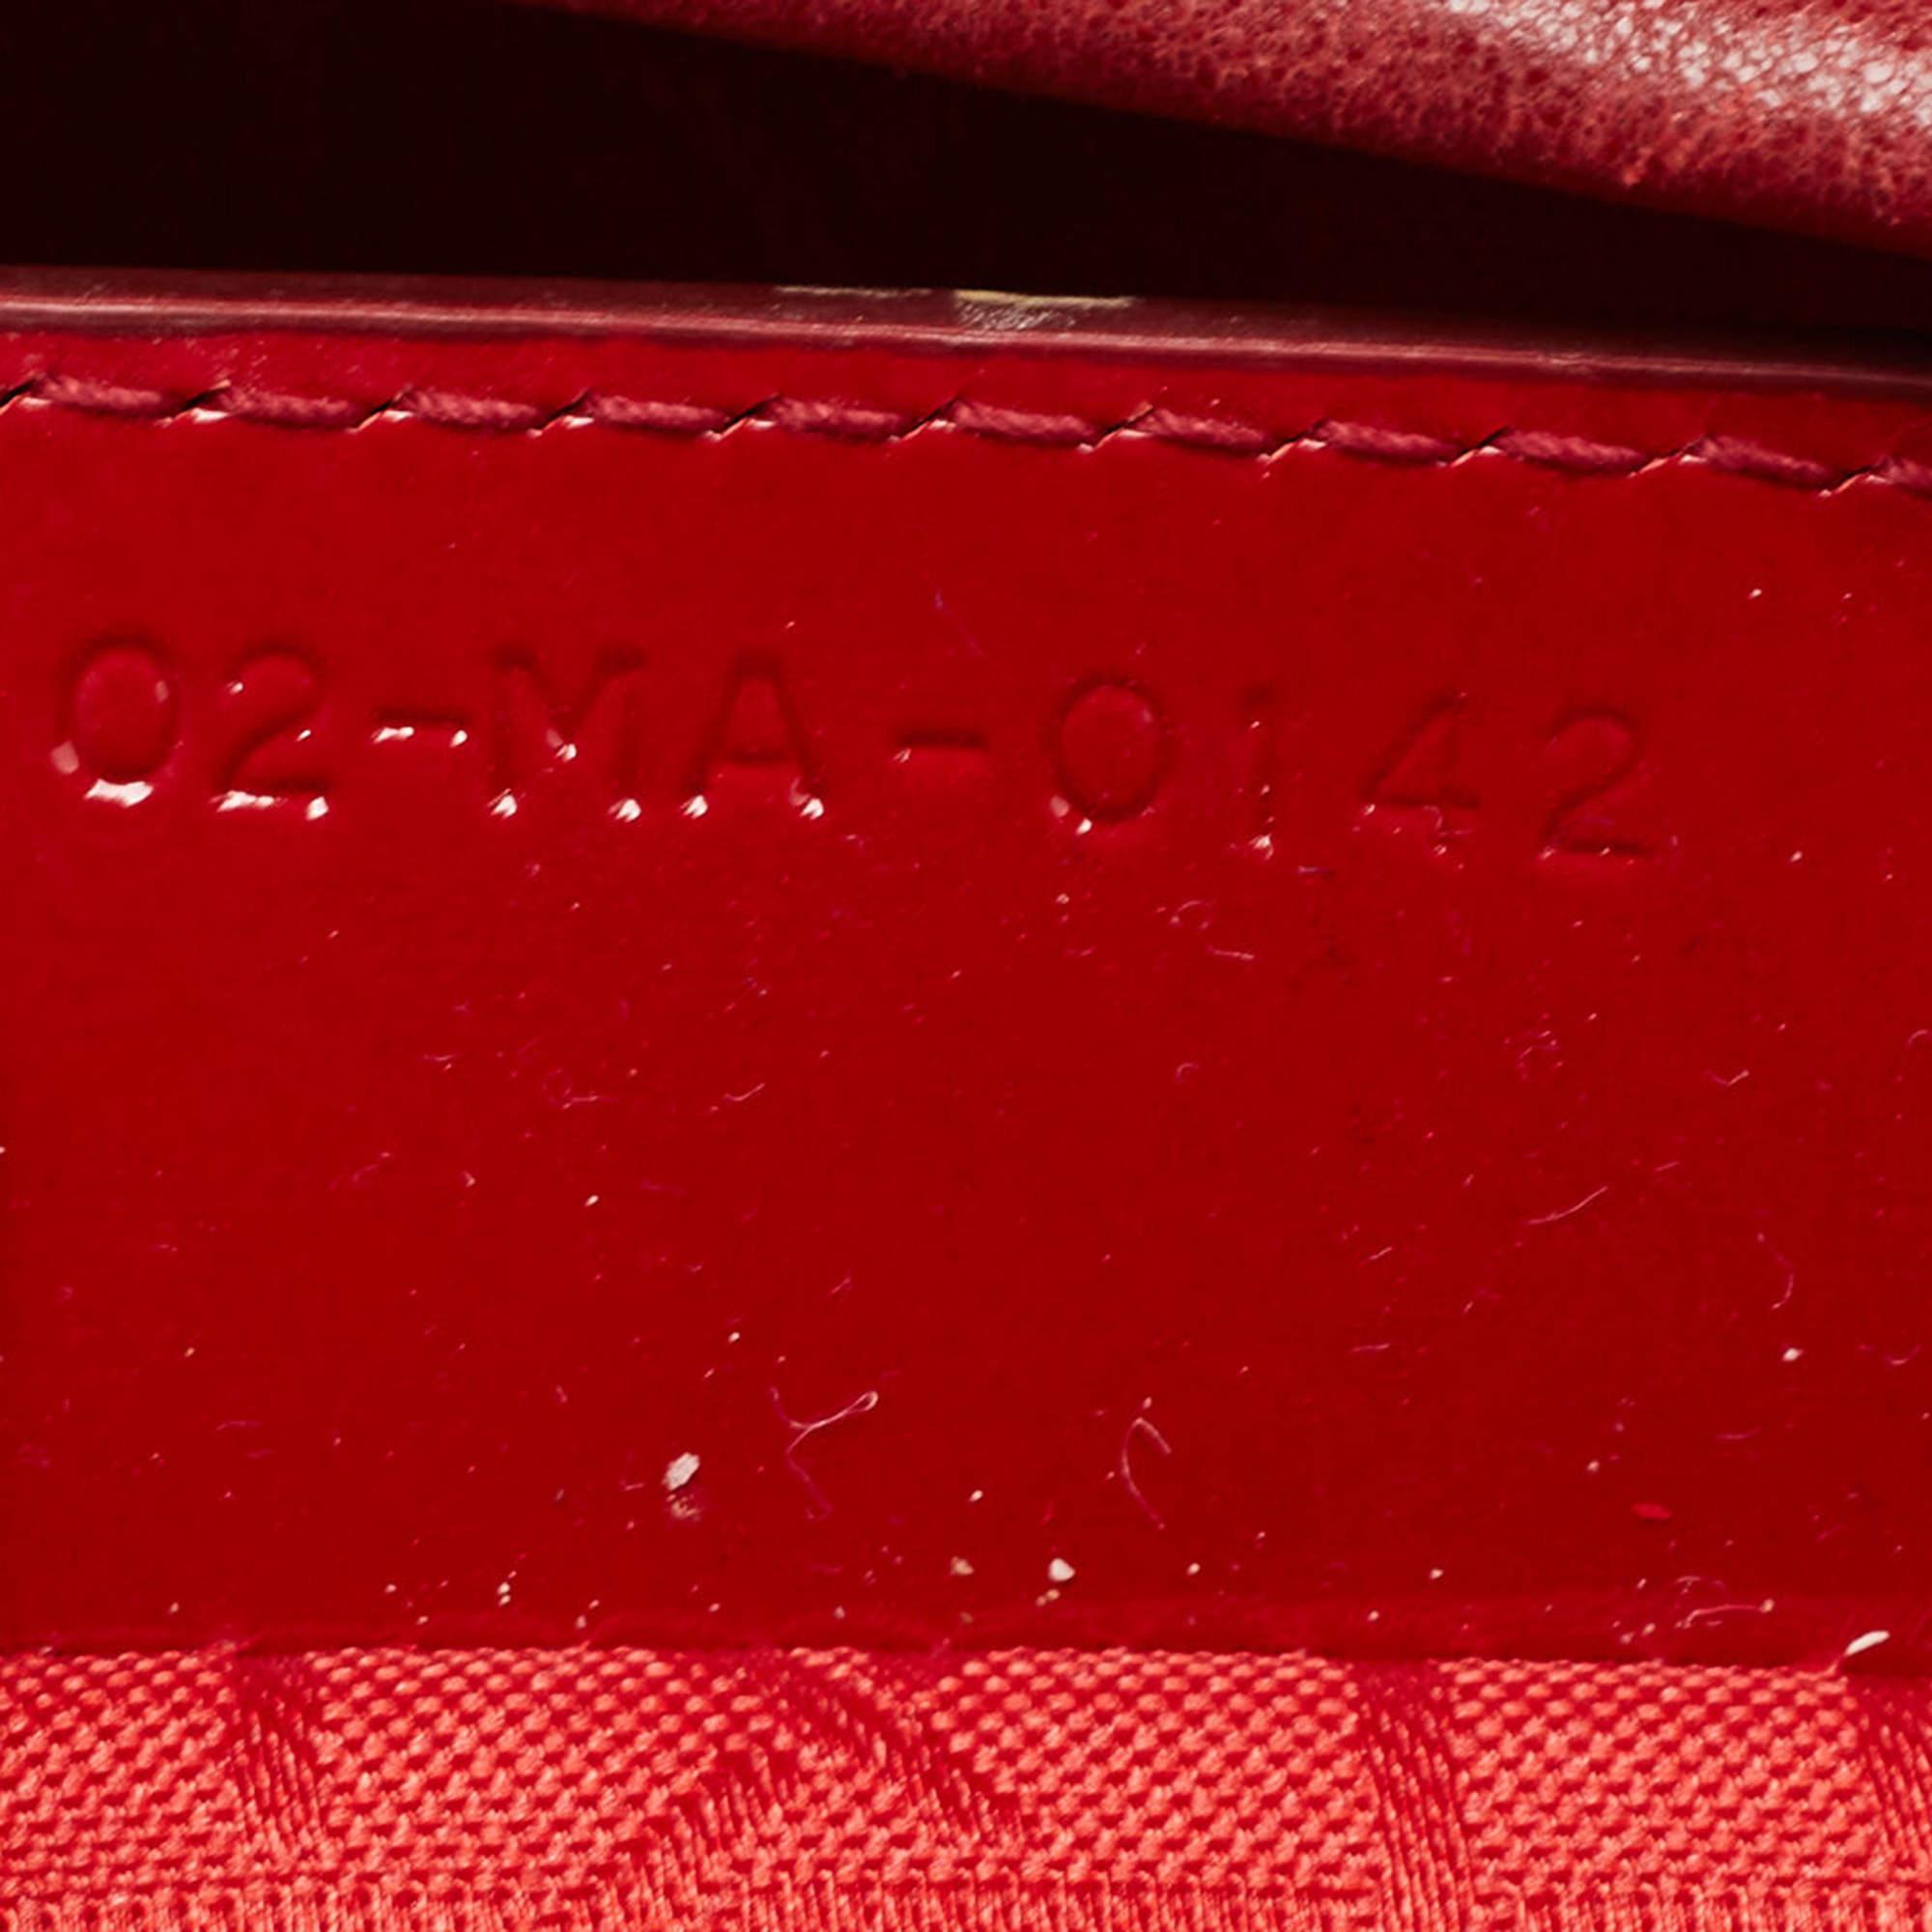 Dior Red Cannage Patent Leather Large Lady Dior Tote For Sale 8